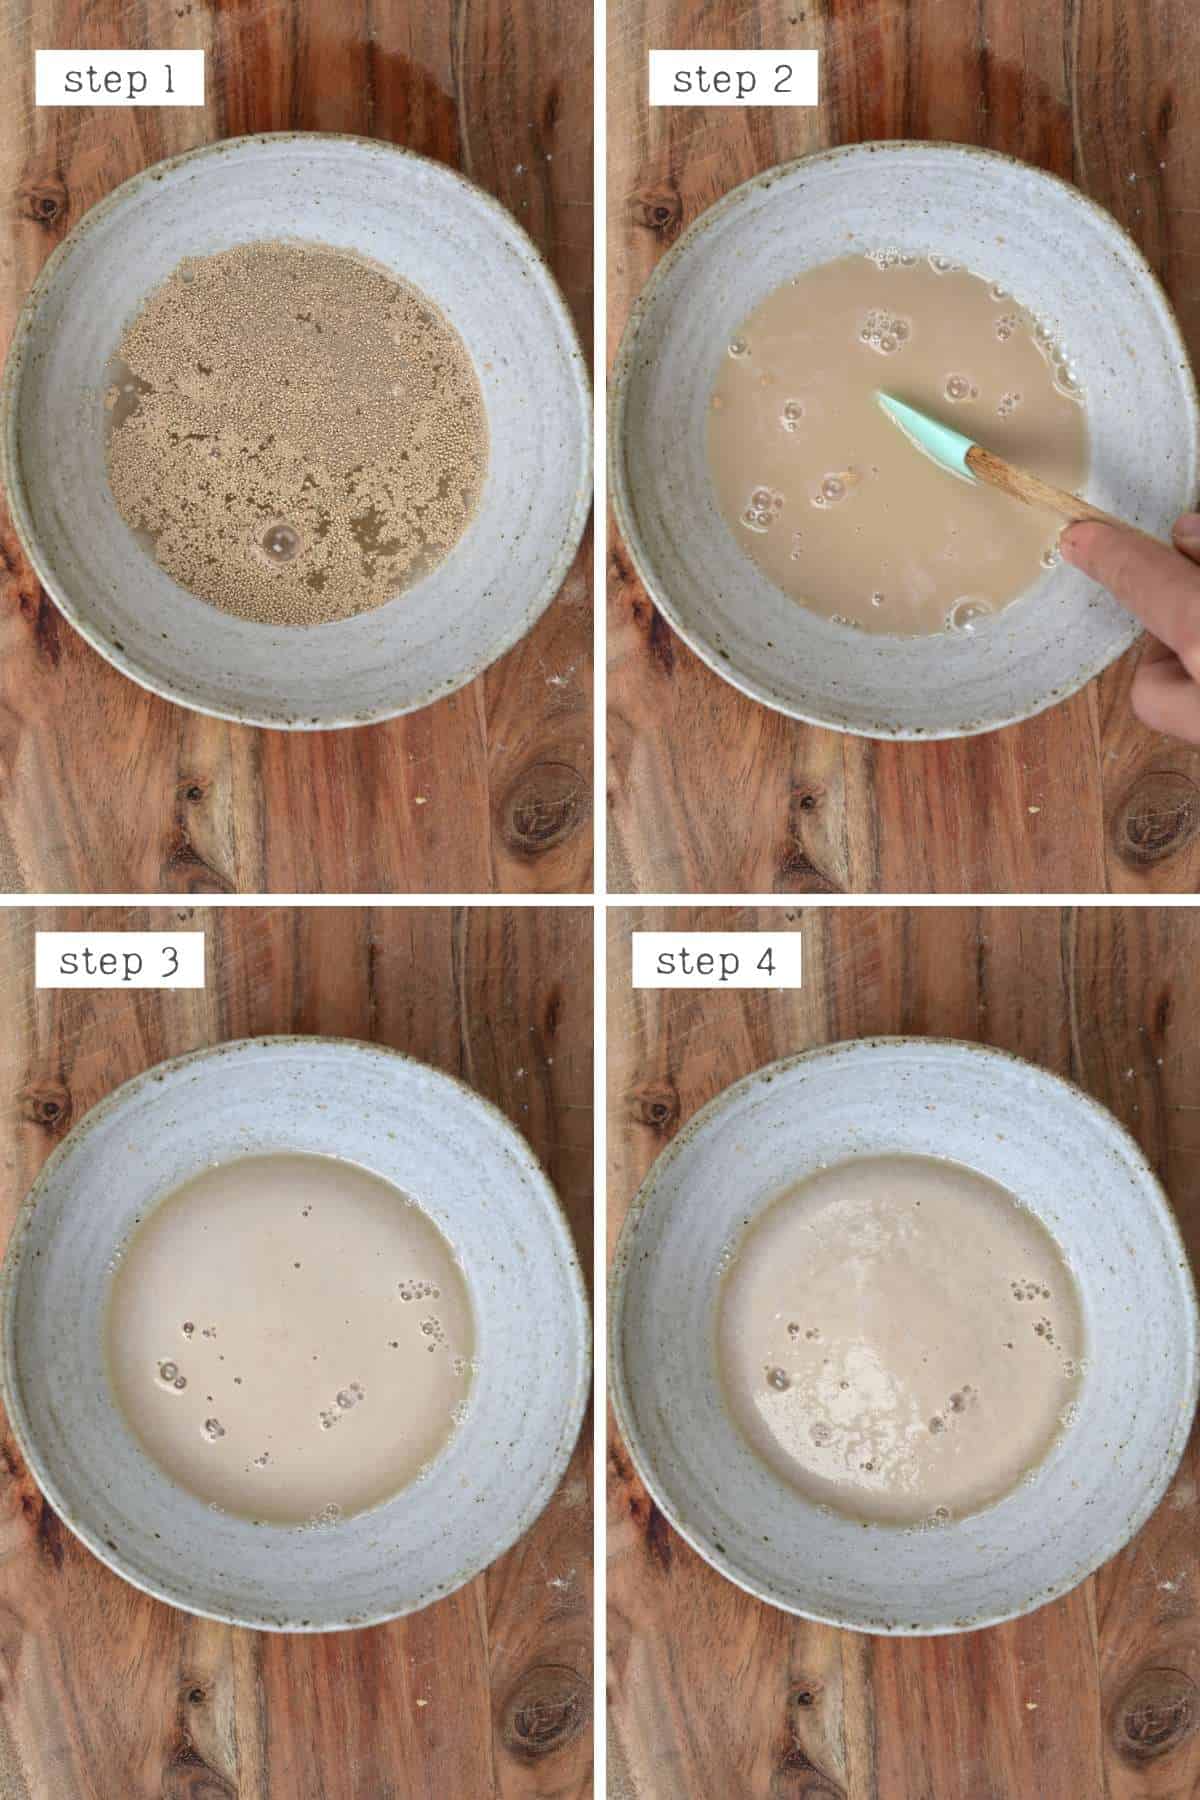 Steps for activating dry yeast